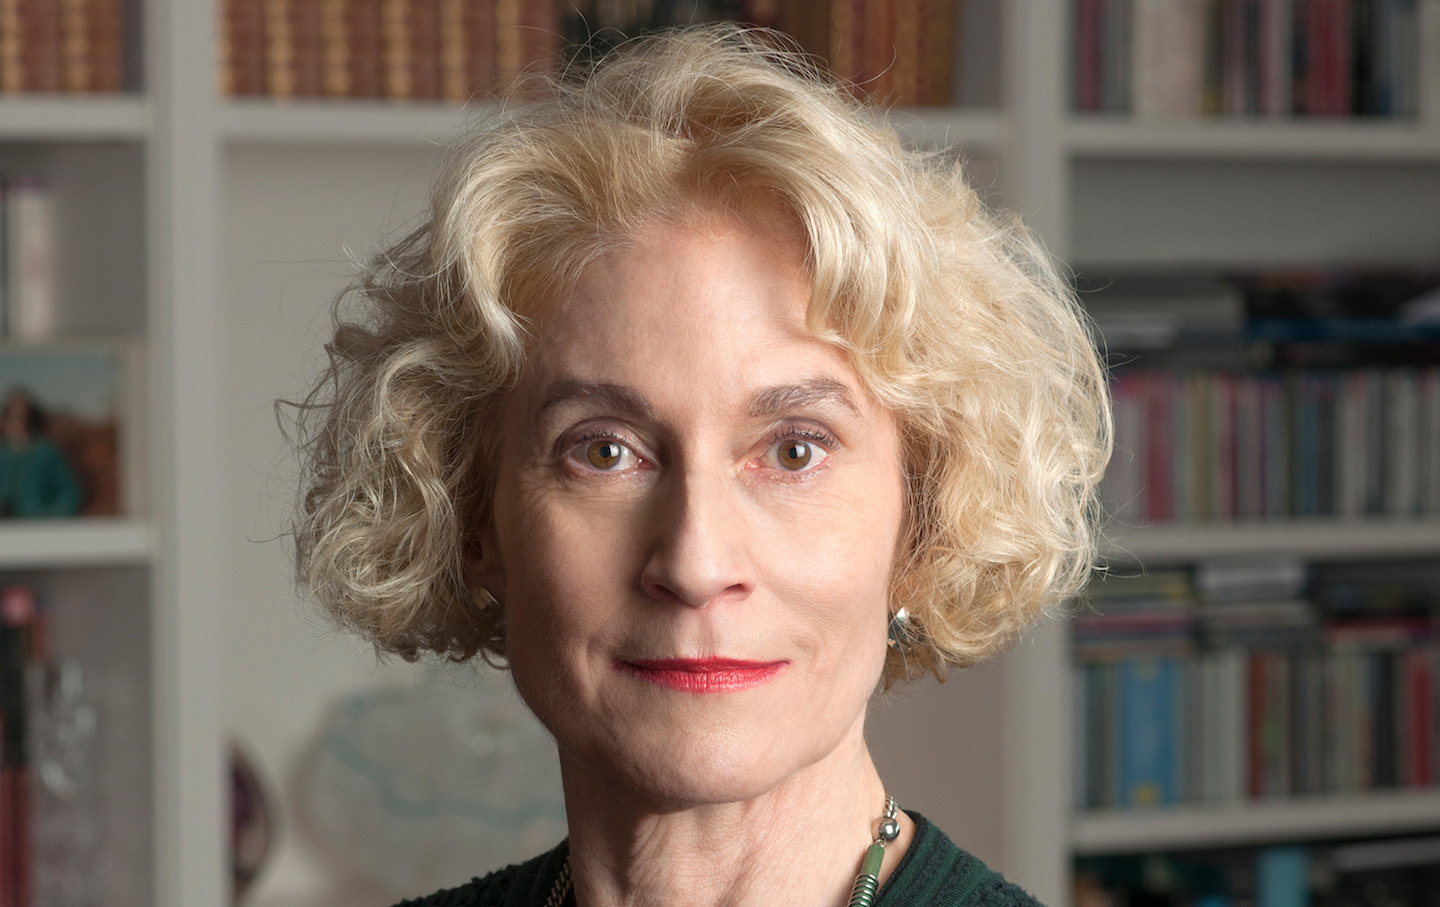 Martha Nussbaum Thinks the So-Called Retreat of Liberalism Is an Academic Fad